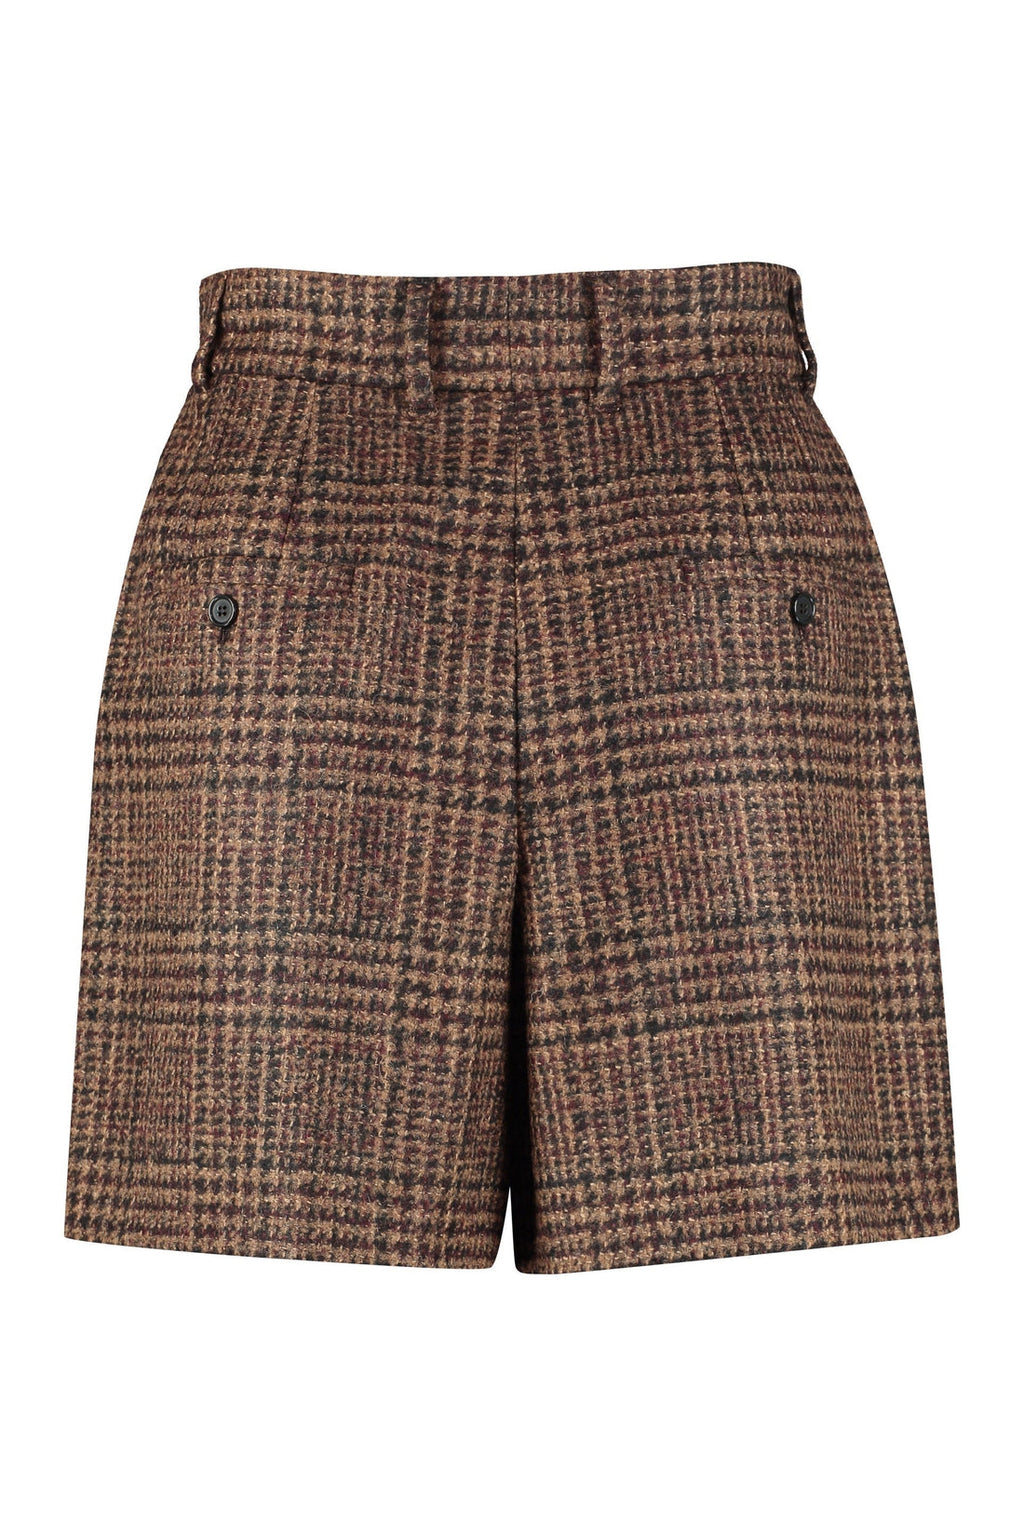 Dolce & Gabbana-OUTLET-SALE-Checked wool shorts-ARCHIVIST